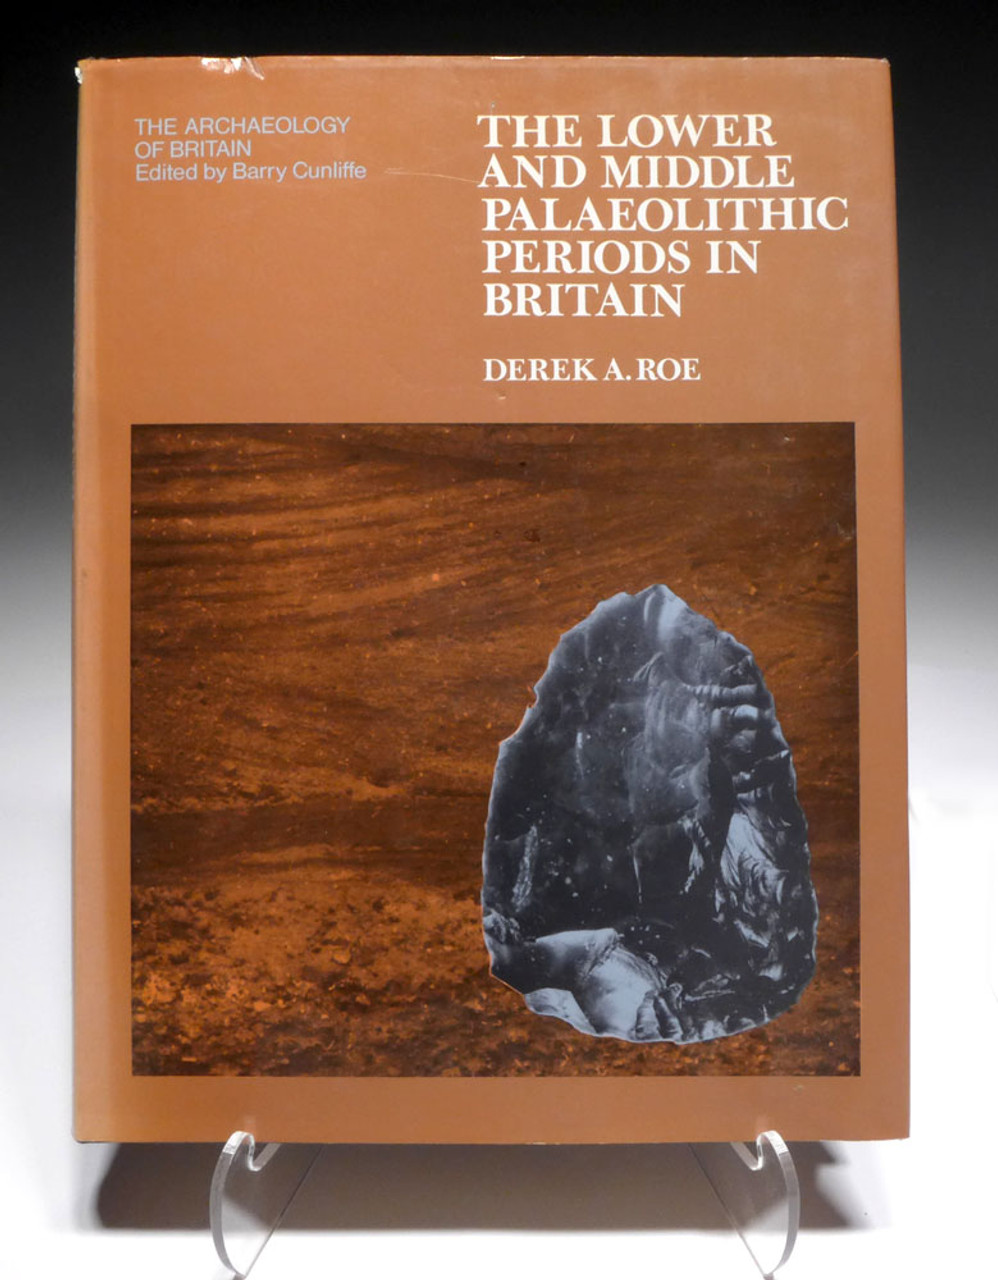 THE LOWER AND MIDDLE PALAEOLITHIC PERIODS IN BRITAIN BOOK  *BK15